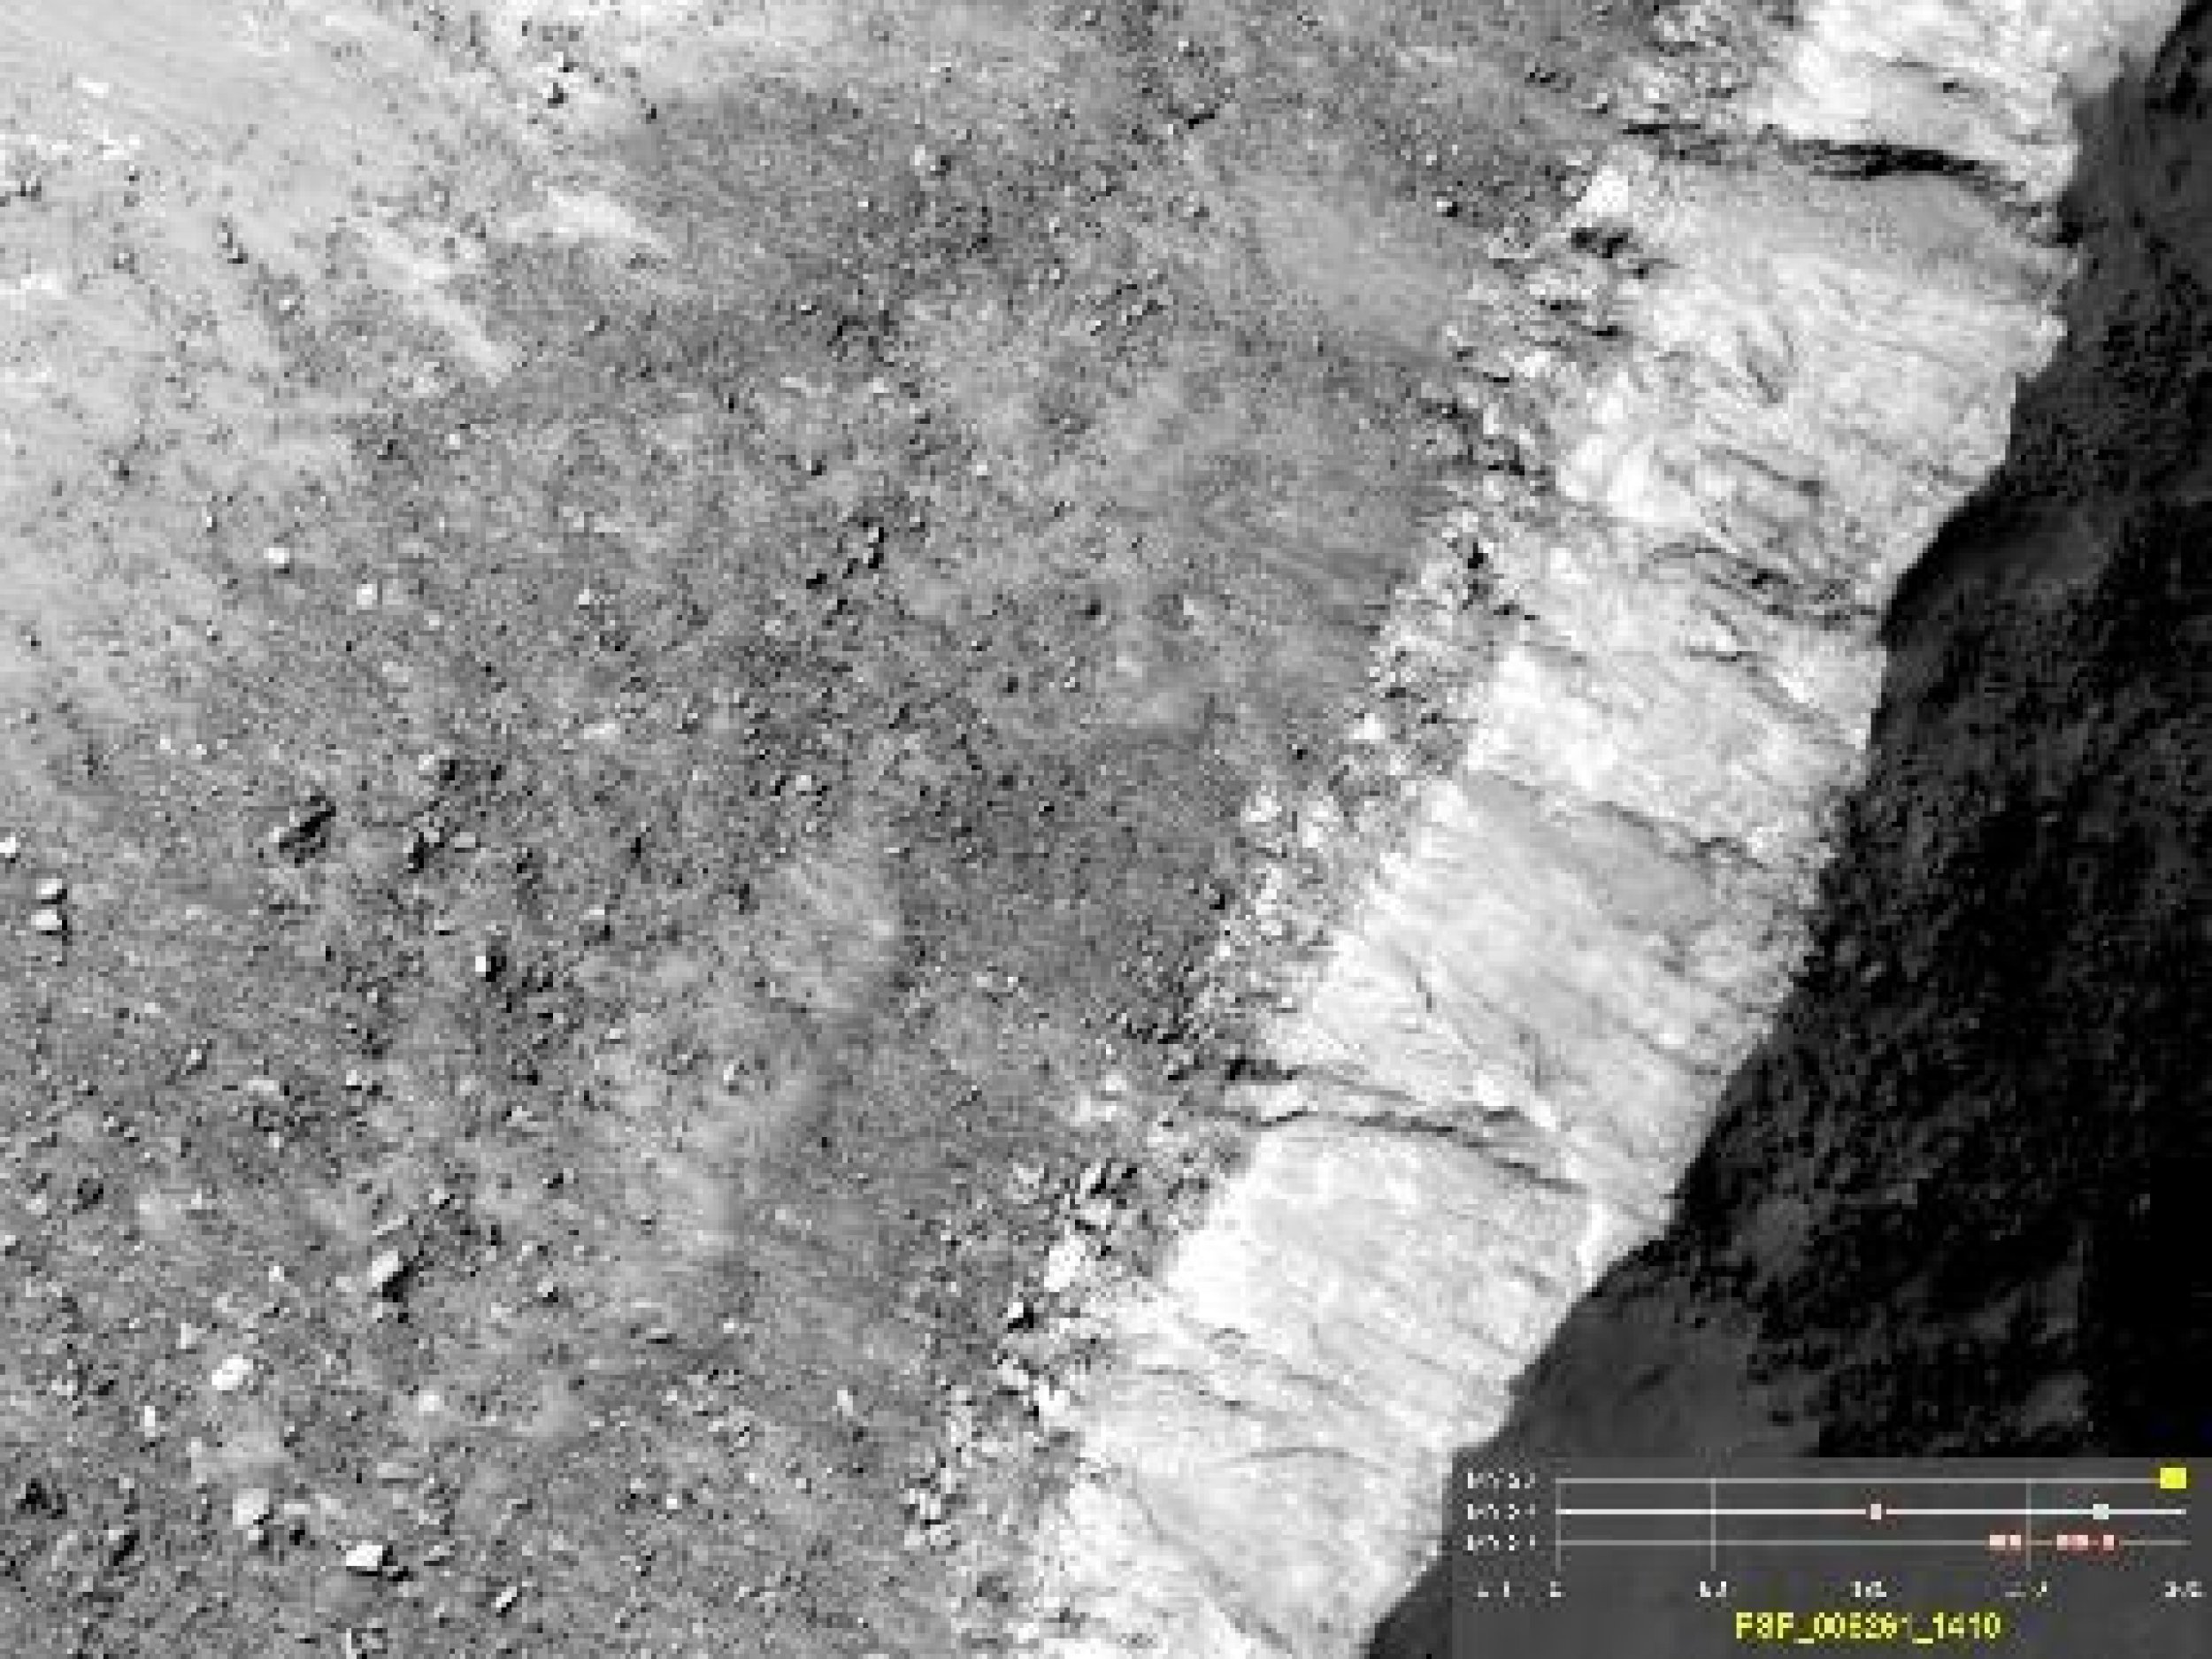 Warm-Season Flows on Steep Slope in Slope in Terra Cimmeria Eight-Image Sequence